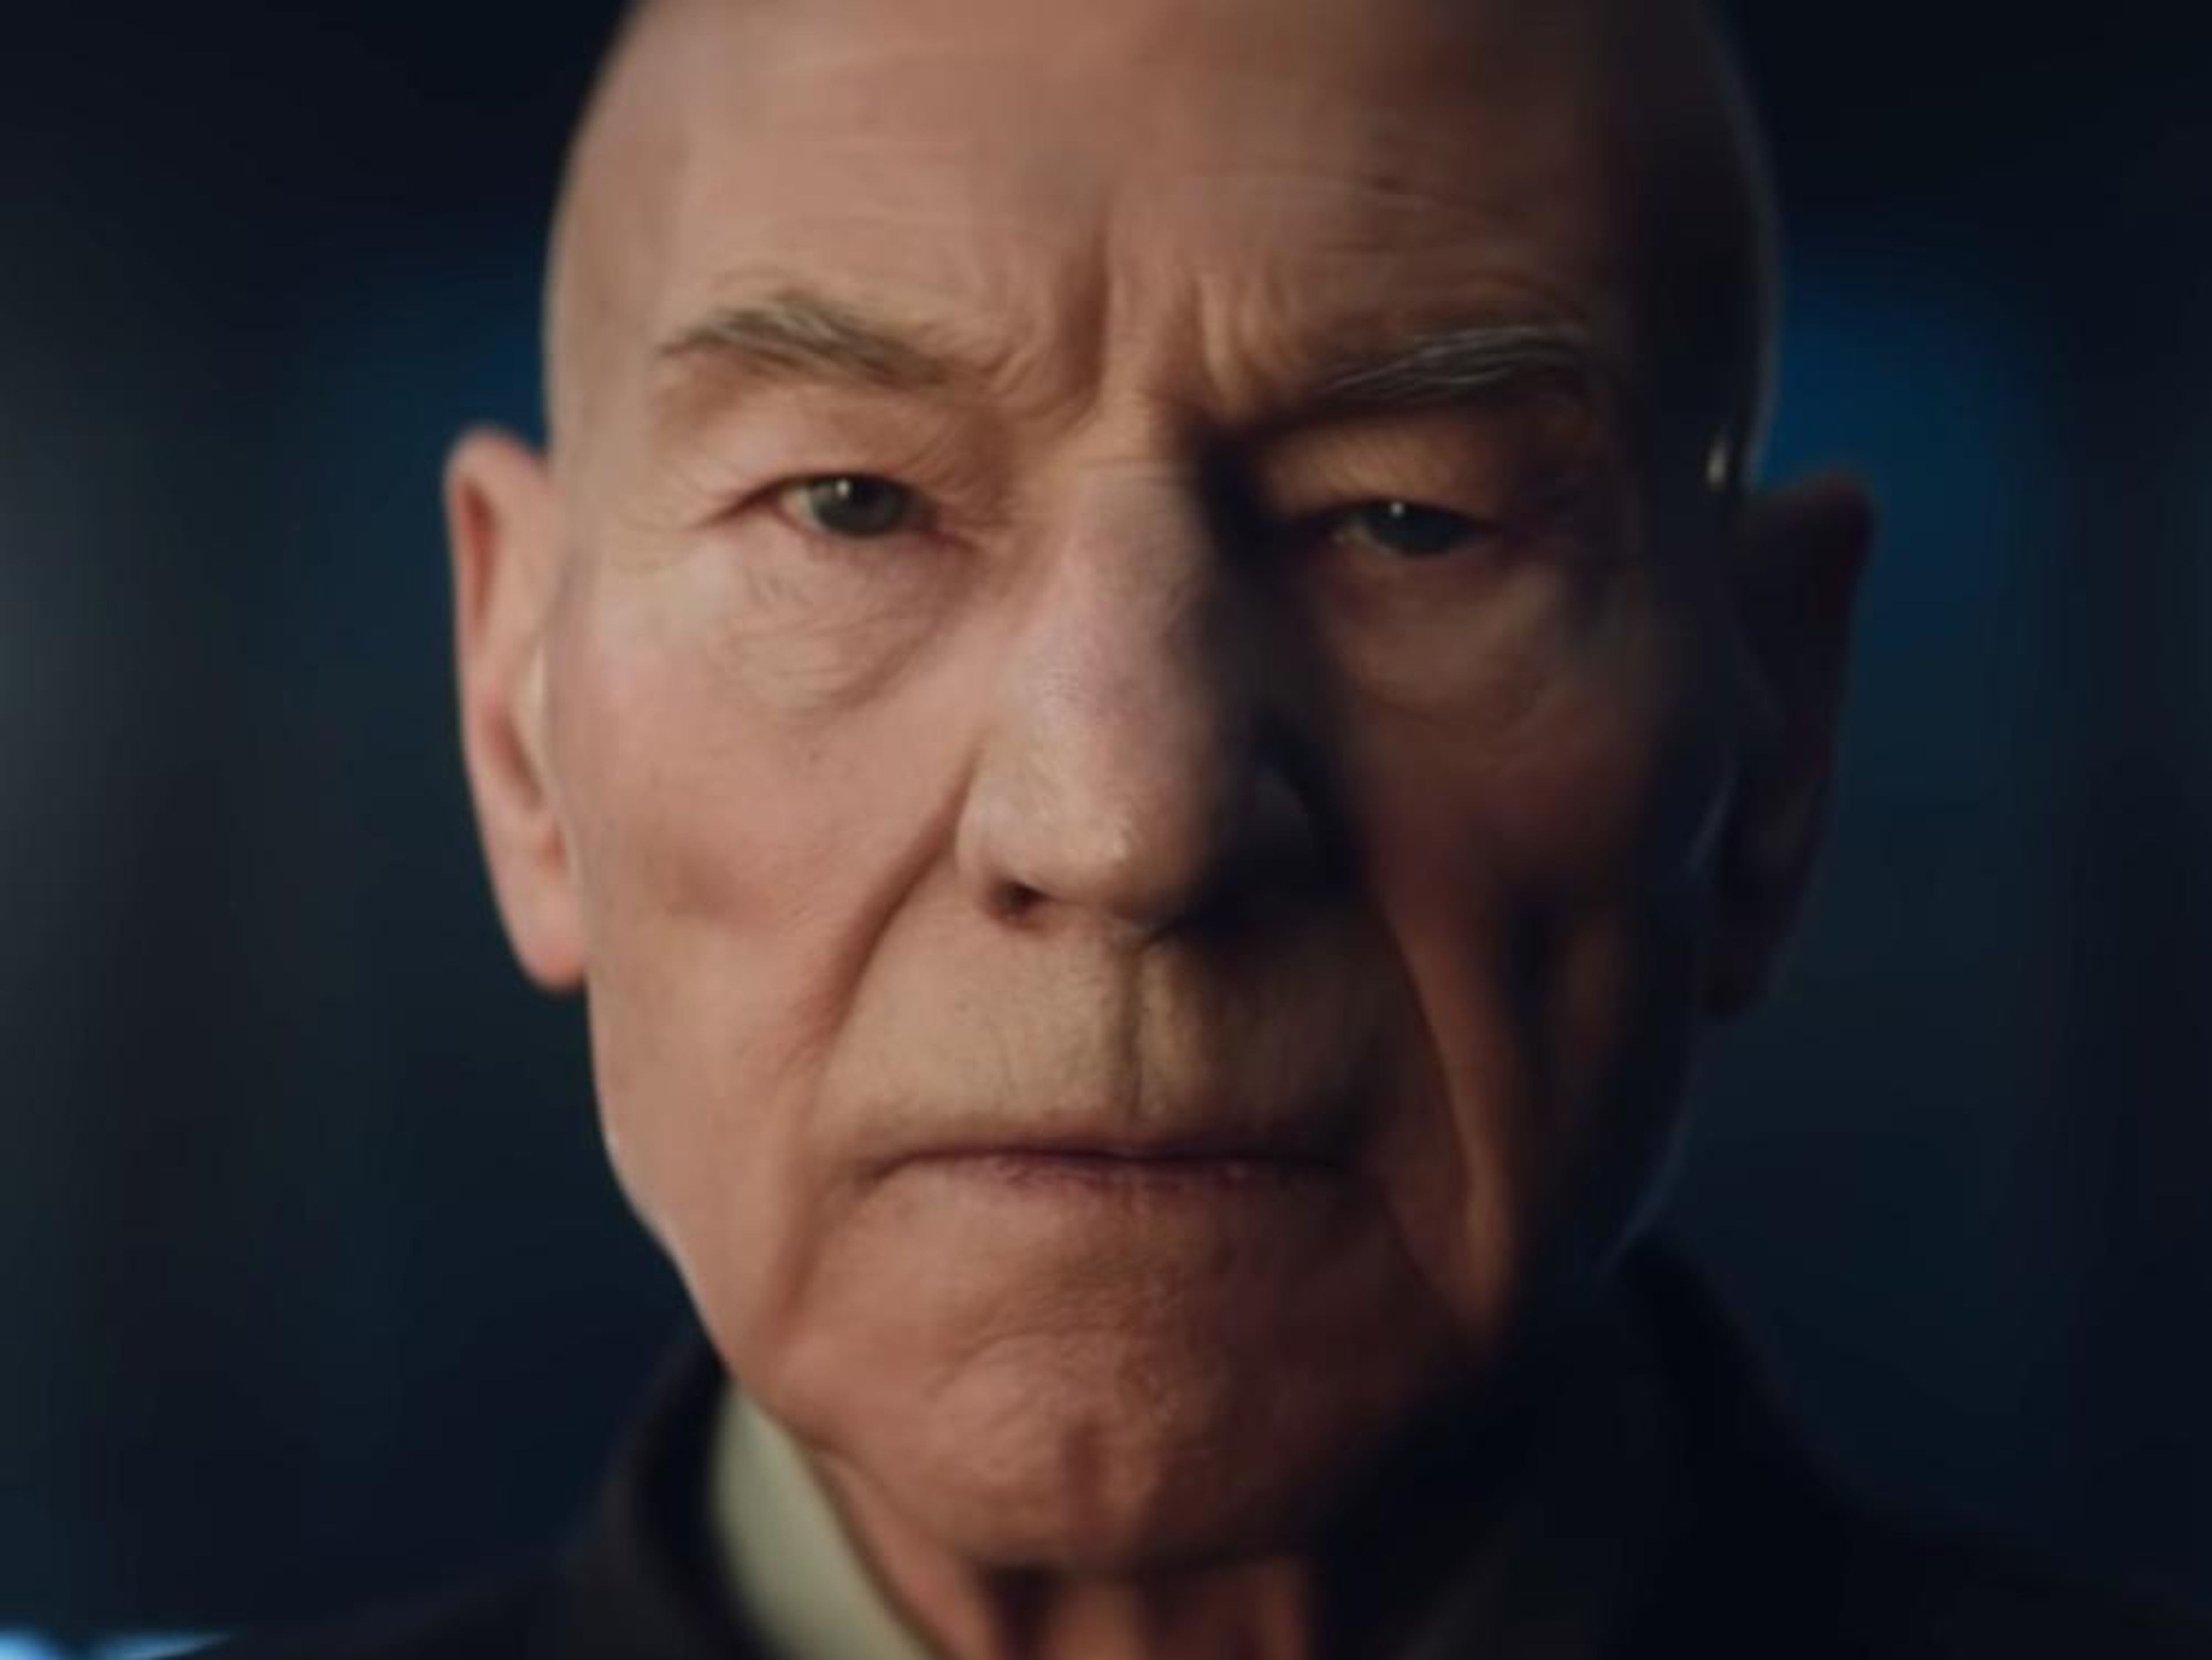 Sir Patrick Stewart reprises his role as Jean-Luc Picard from "Star Trek: The Next Generation."